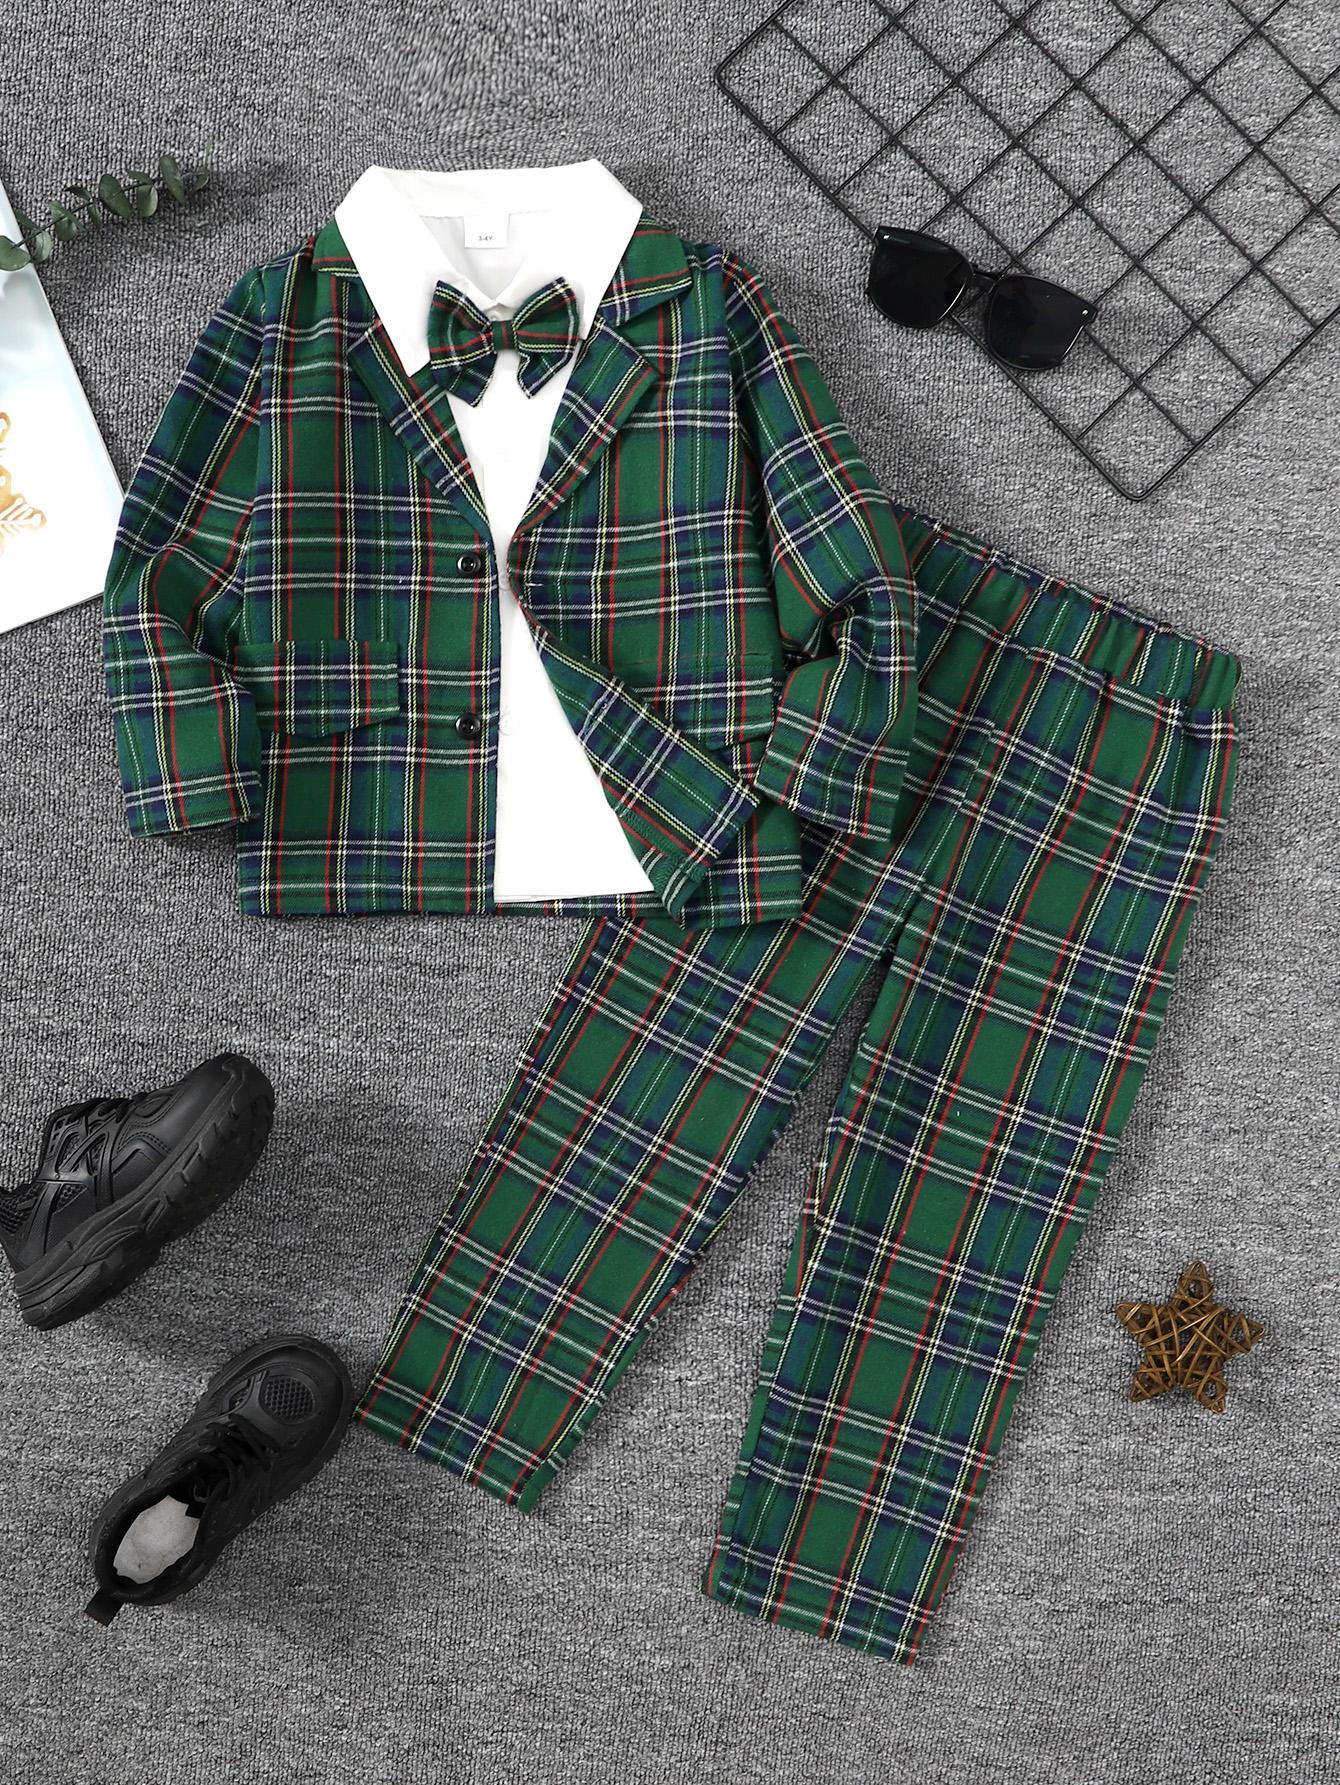 4-7Y Ready Stock 3pcs Boy's Plaid Patter Gentleman Outfit, Bowtie Shirt & Suit & Pants Set, Formal Wear For Speech Performance Birthday Party, 4-7y Kid's Clothes Catpapa 462308166